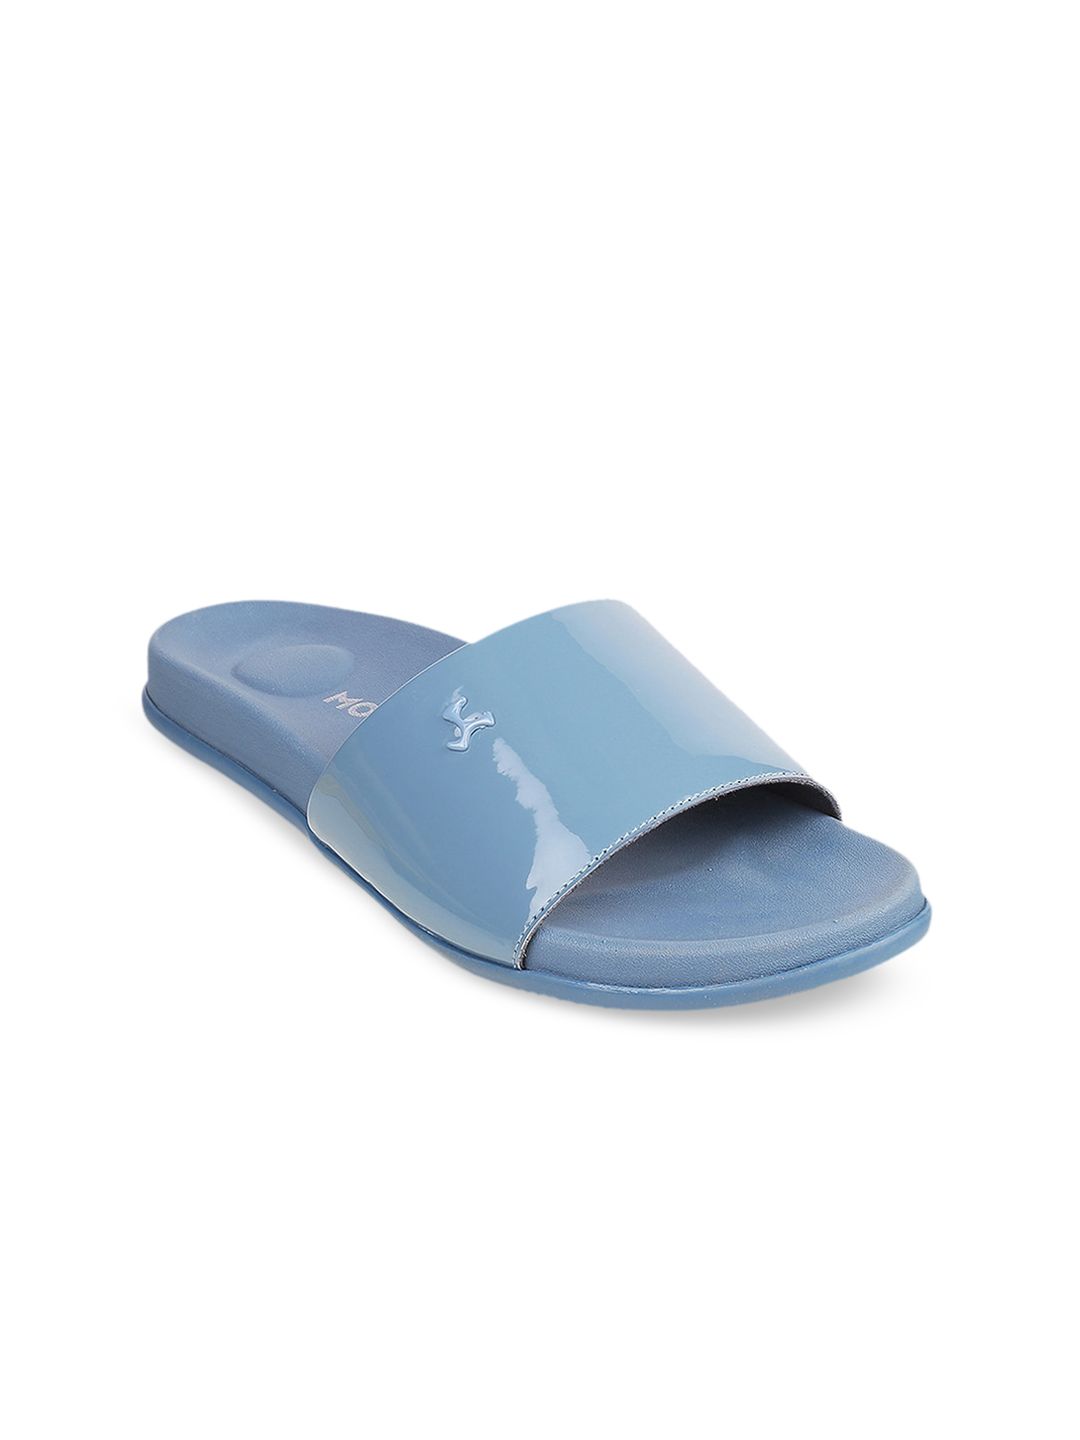 Mochi Women Blue Solid Sliders Price in India